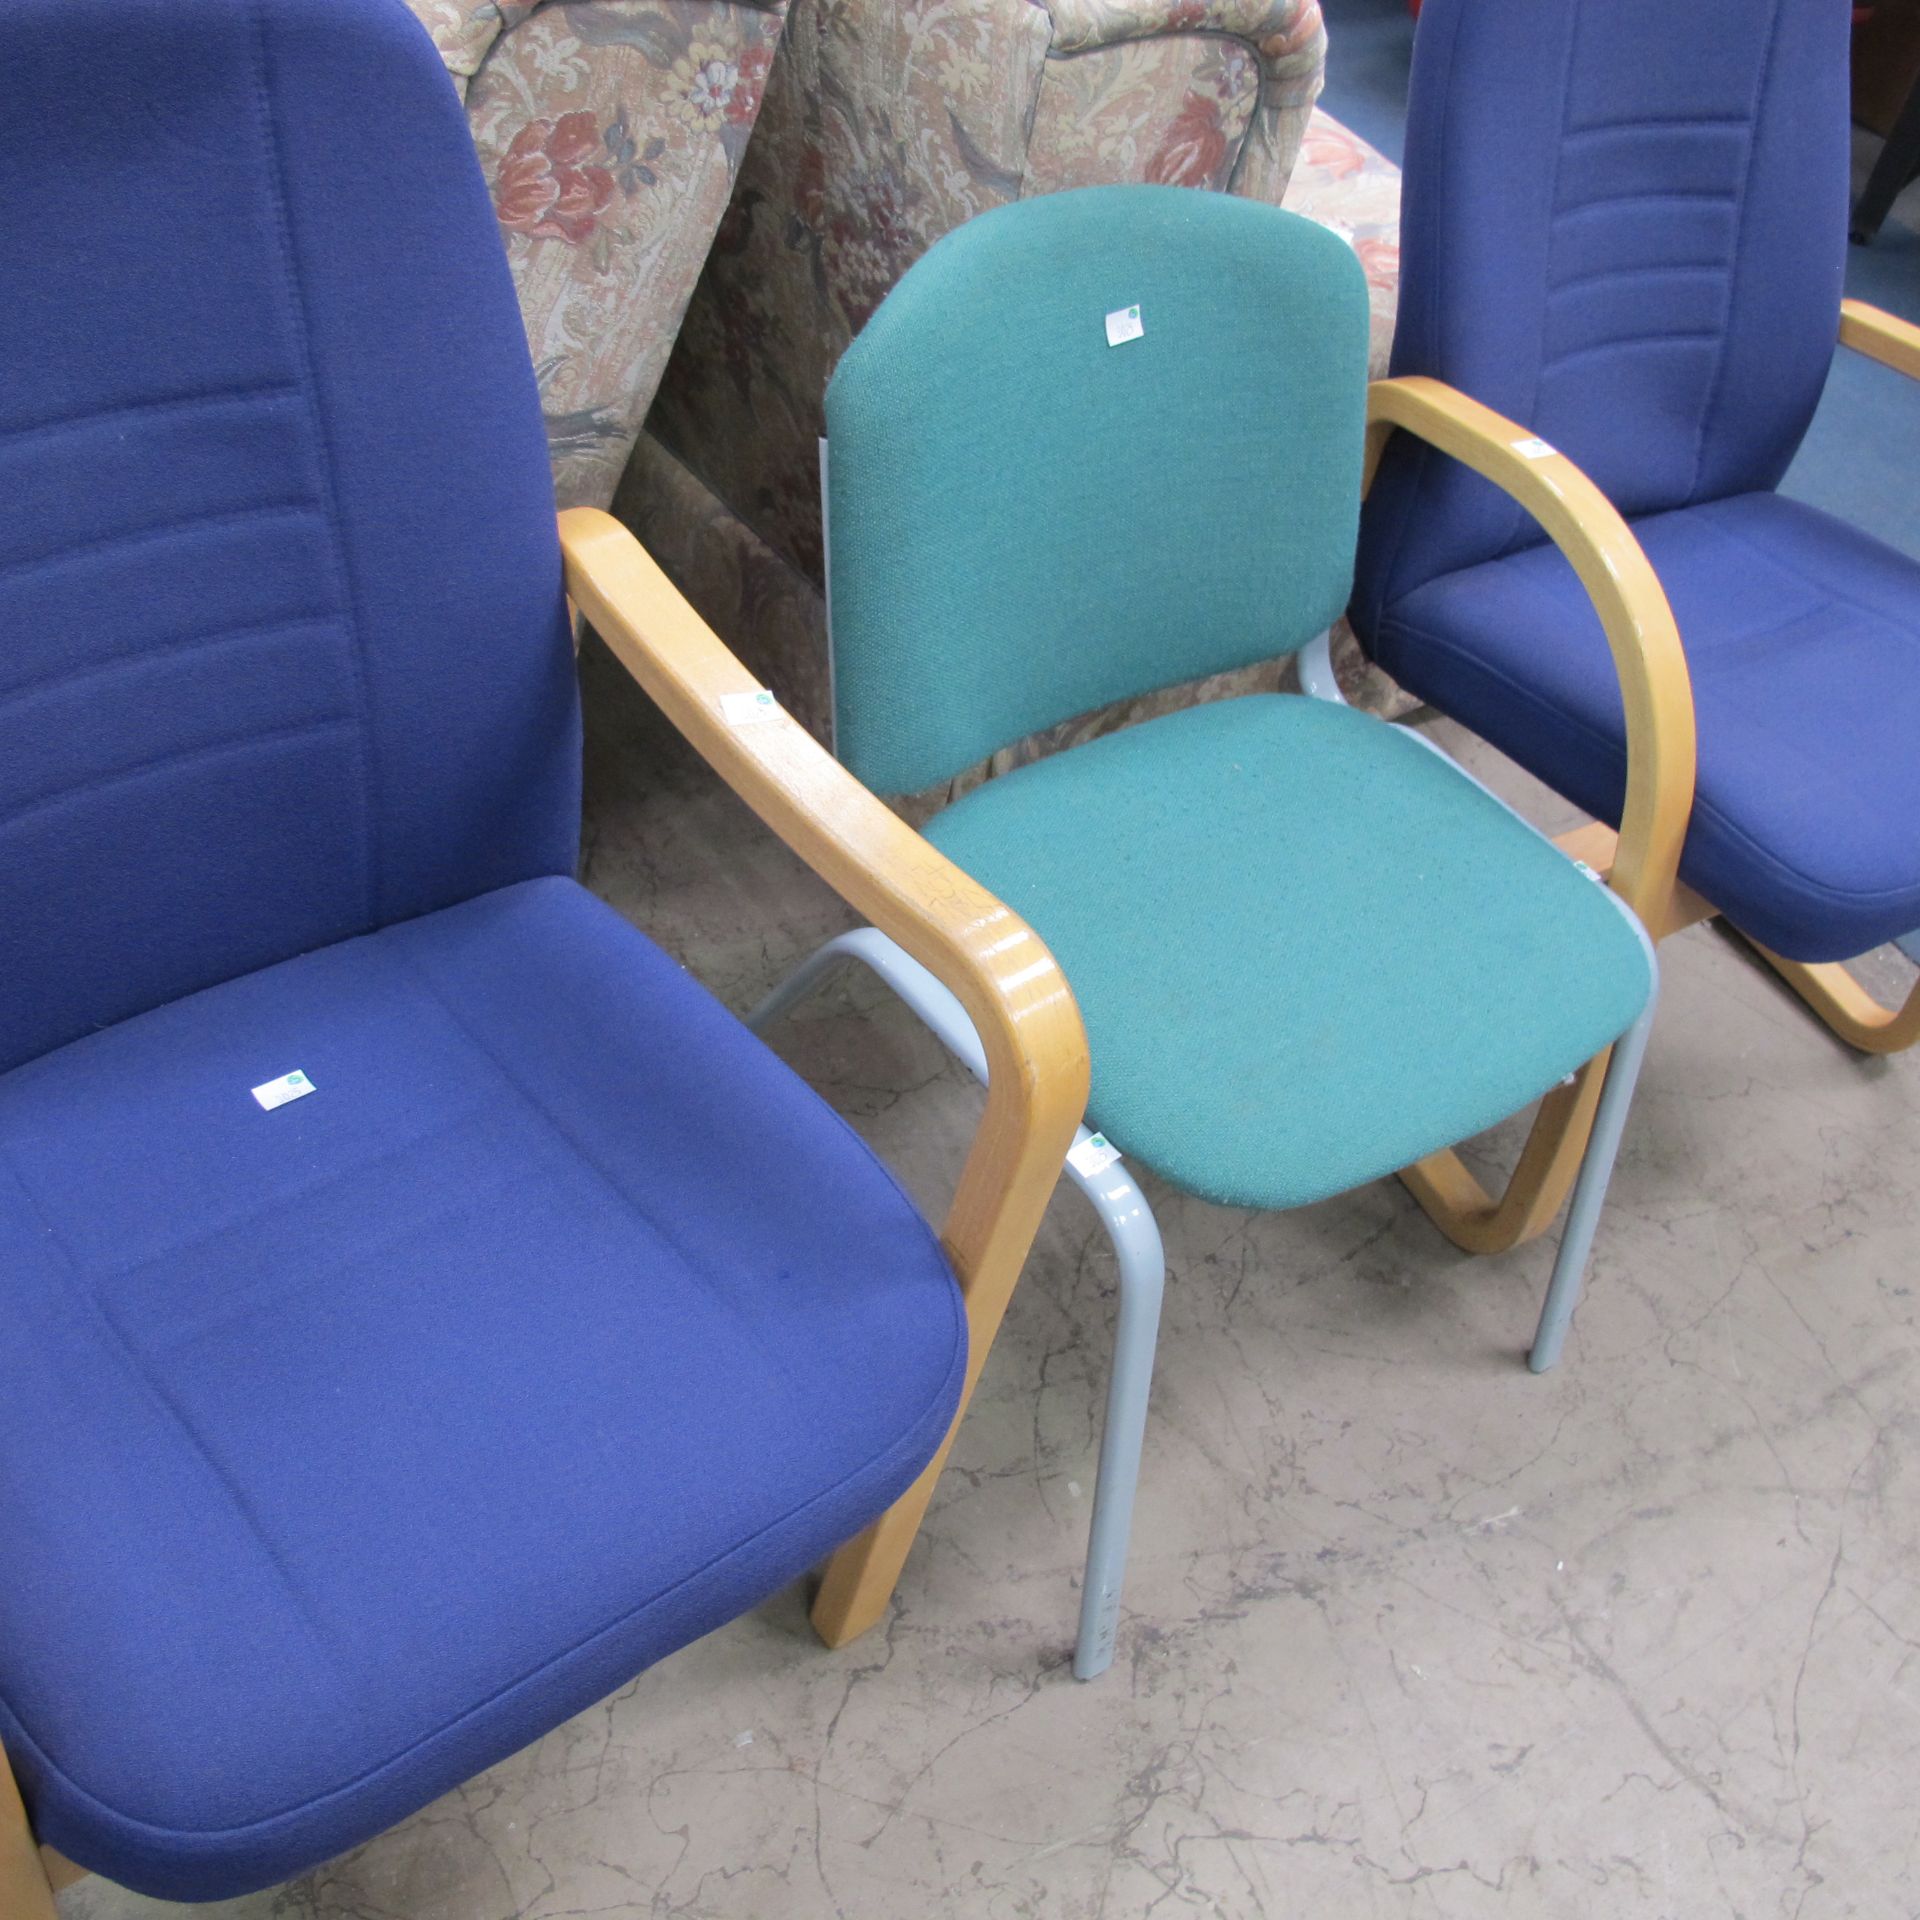 * A lot to contain 2 x similar blue waiting room chairs with wooden legs and arm rests, and a